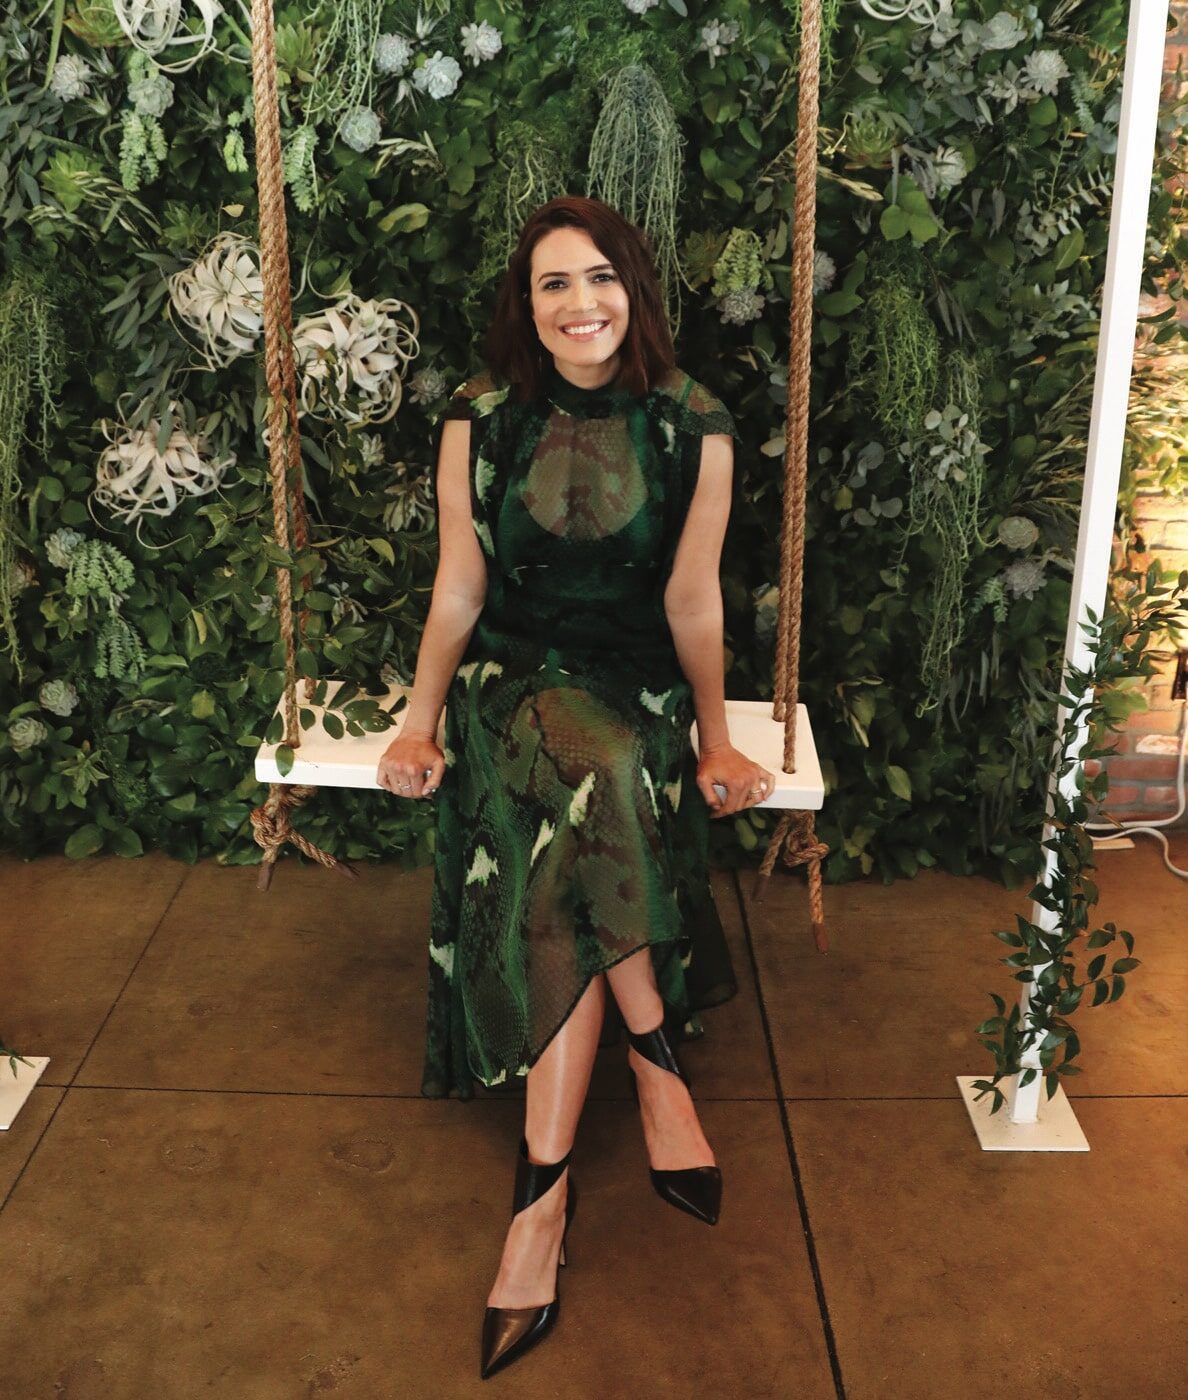 Mandy Moore's tips to nourish your mind and body this summer